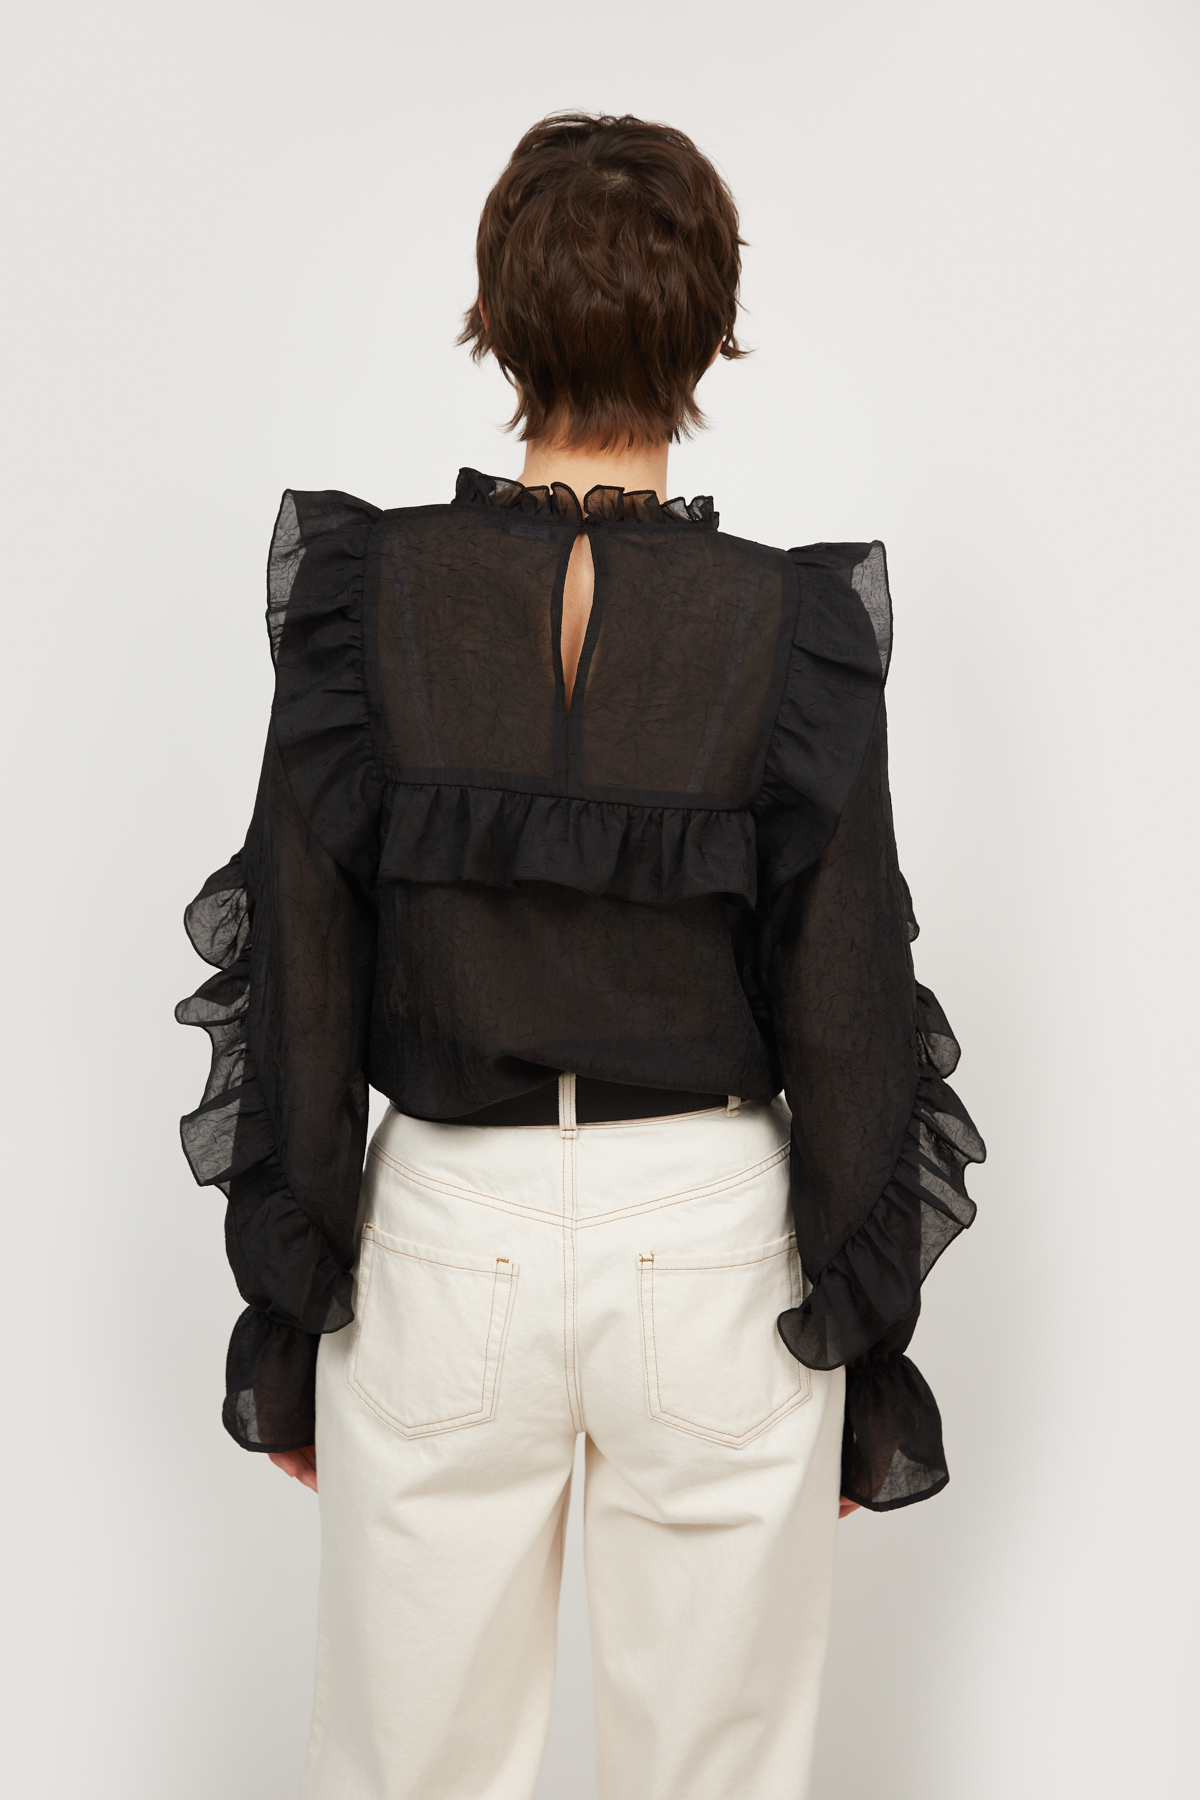 Blouse with ruffles in wrinkled chiffon in black, photo 5